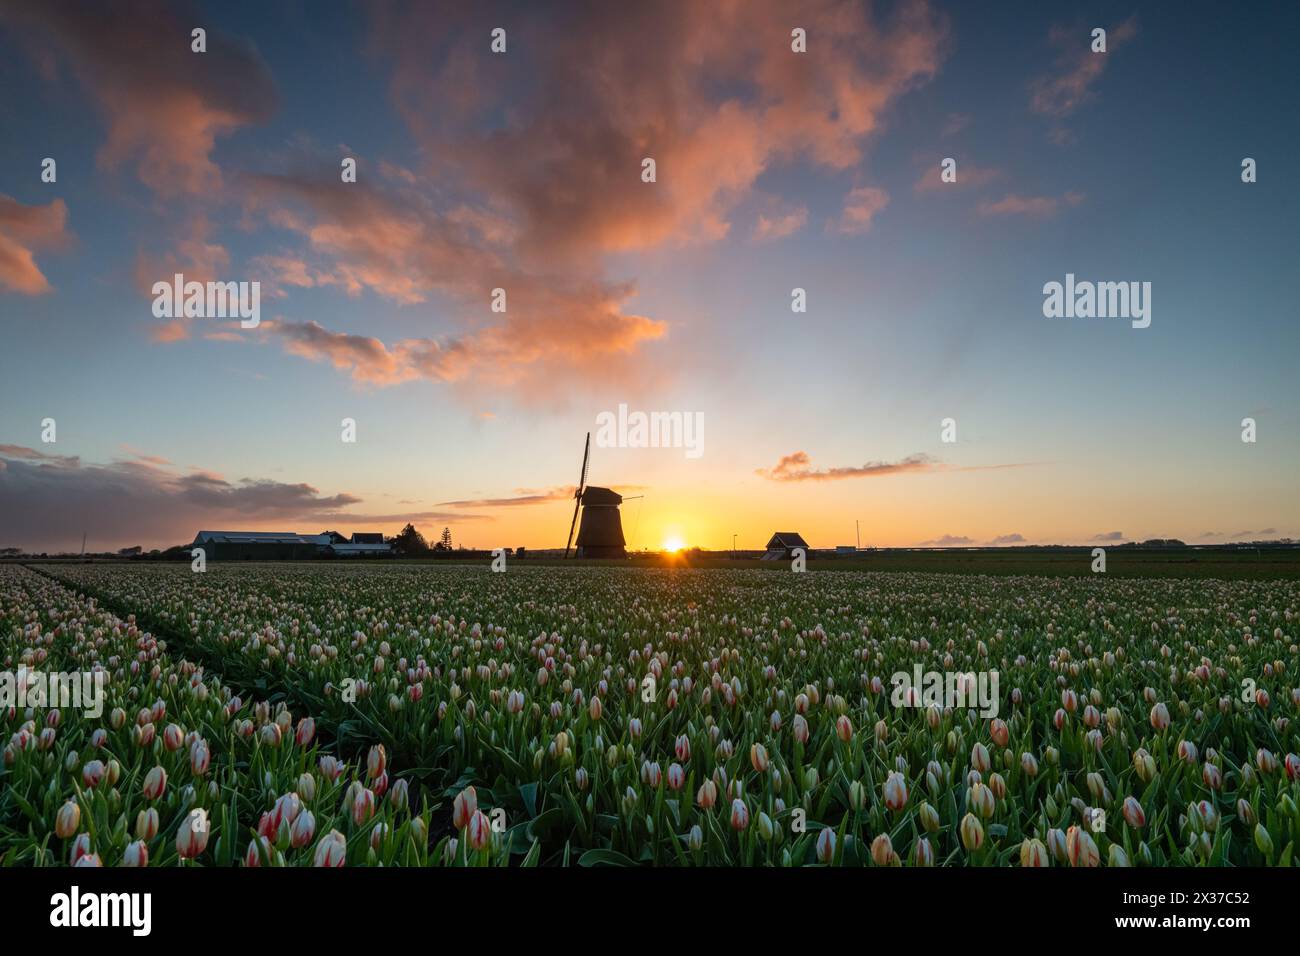 Dutch tulips field at sunrise with windmill silhouette Stock Photo